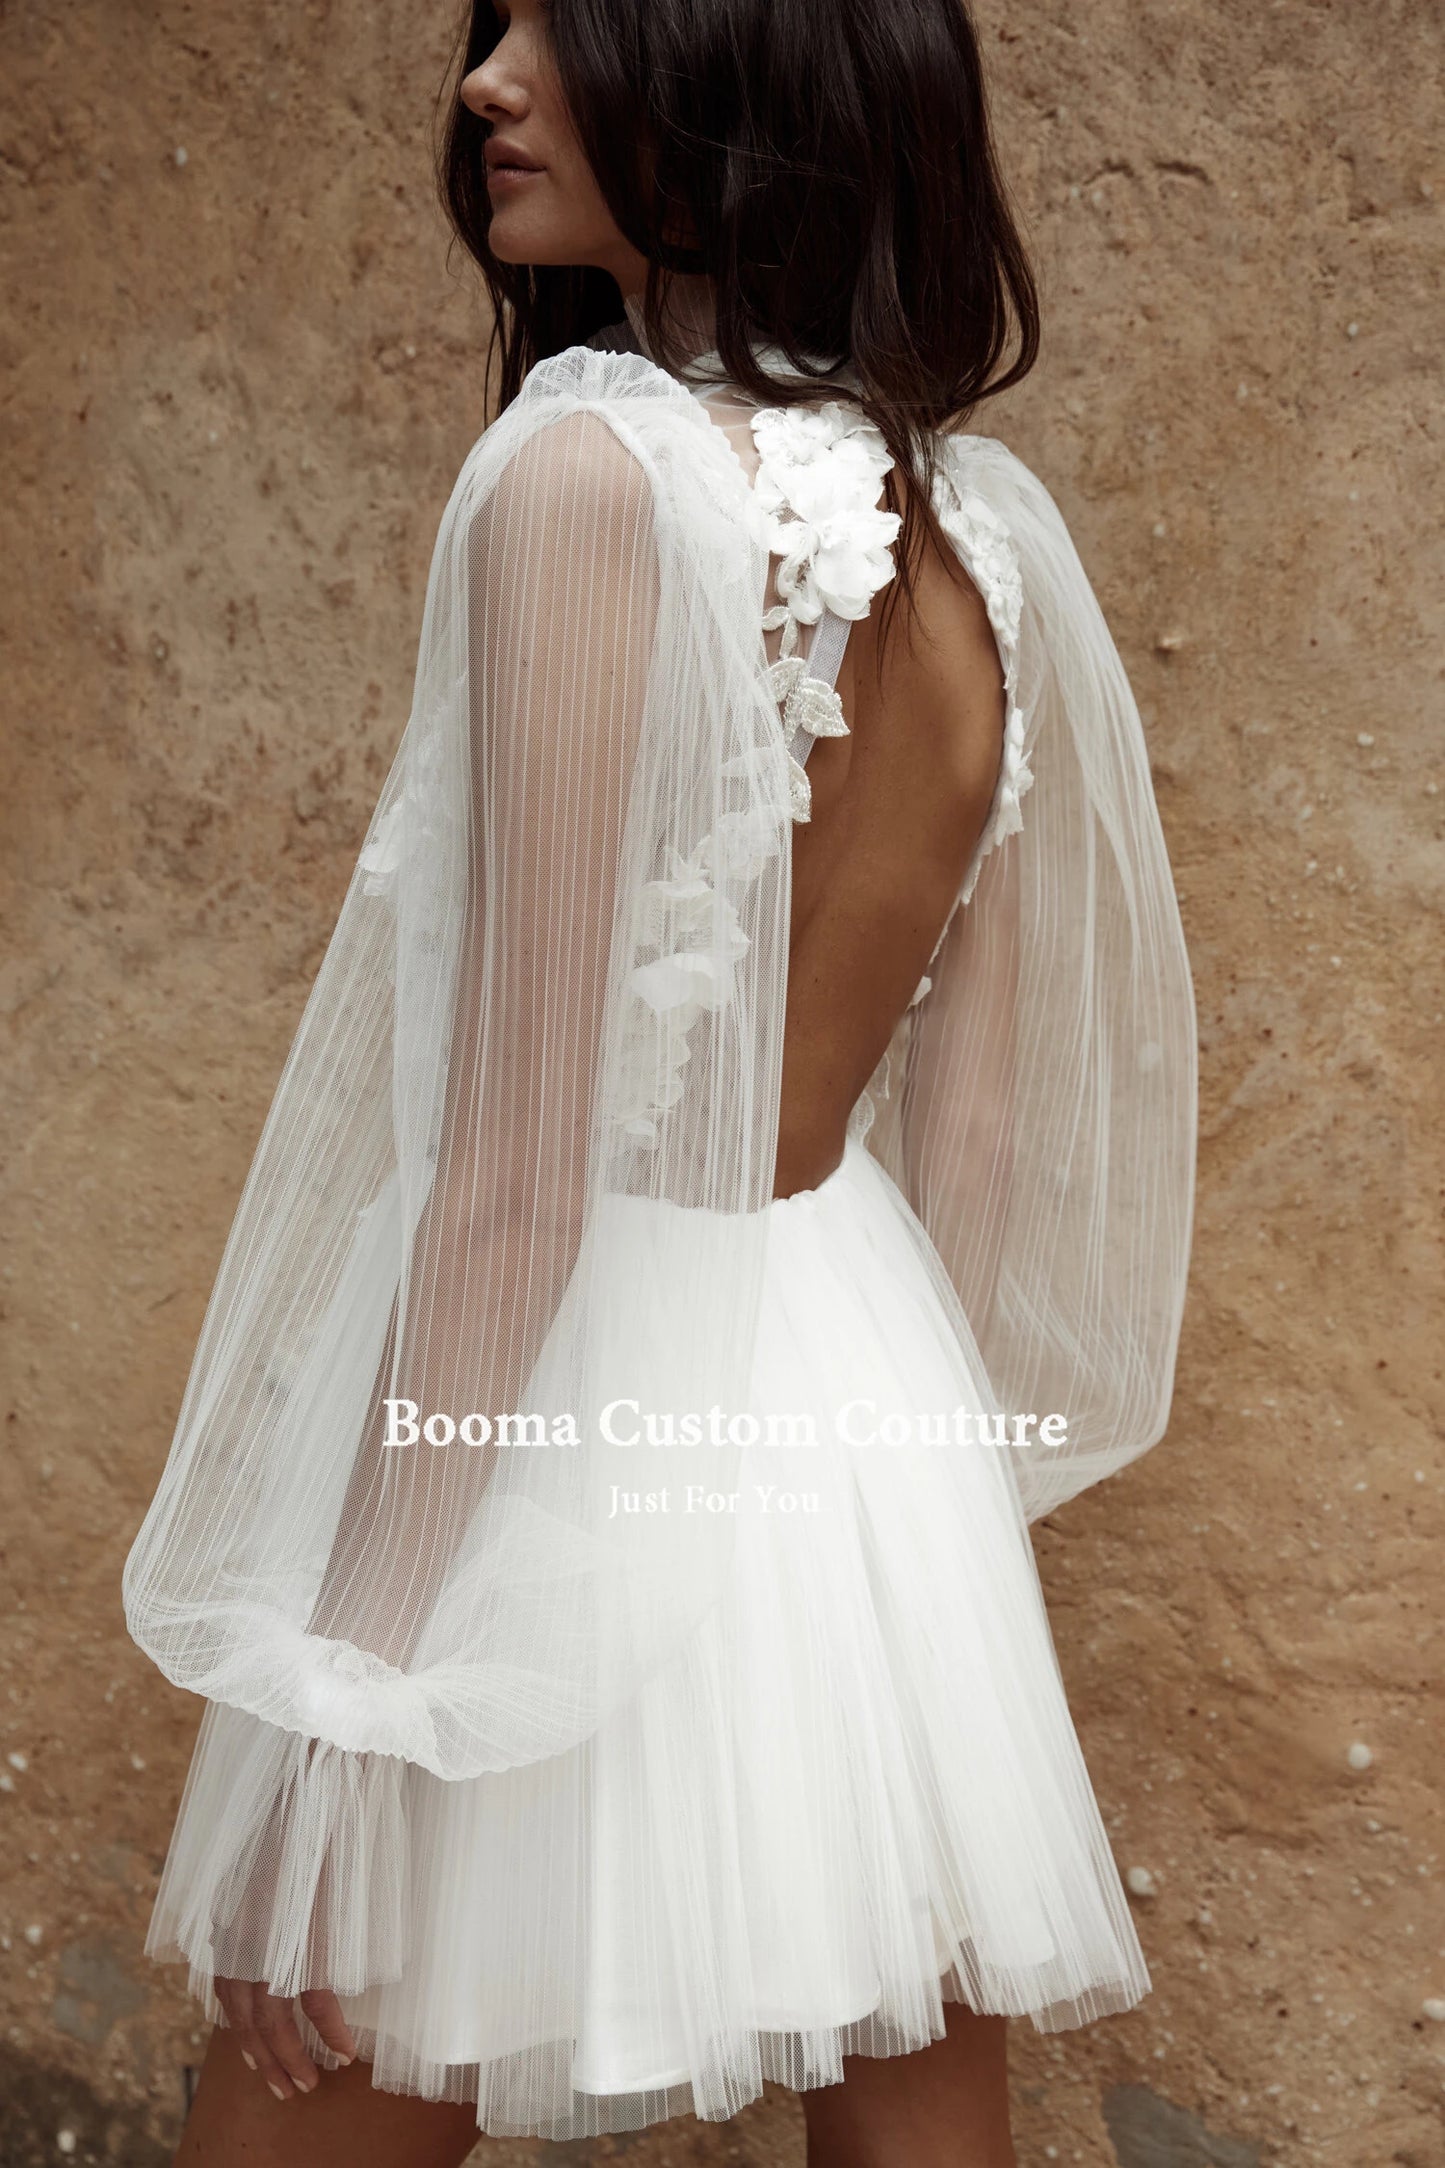 Simple Backless Short Wedding Dresses Long Sleeves Pleated Tulle Mini Bride Dresses Flowers Illusion Civil Wedding Gowns